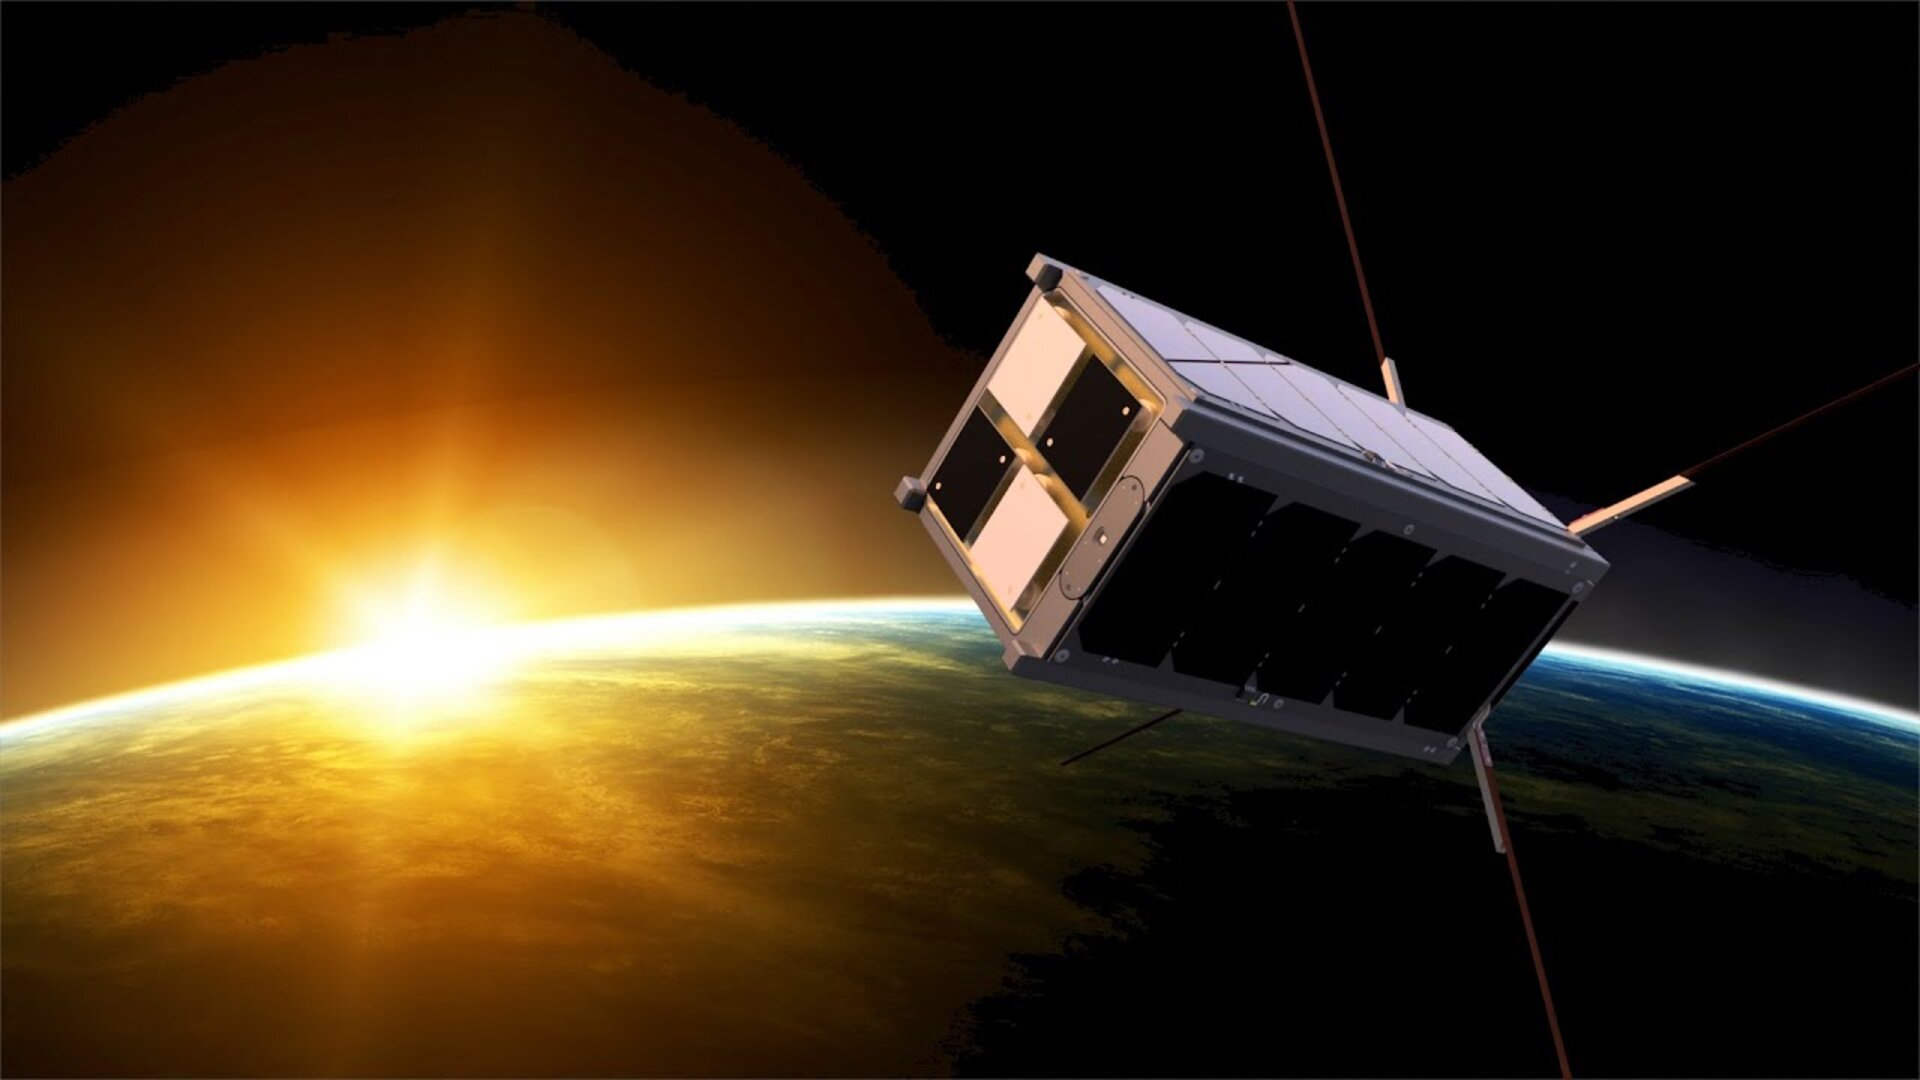 Watch the launch of Ireland's first satellite